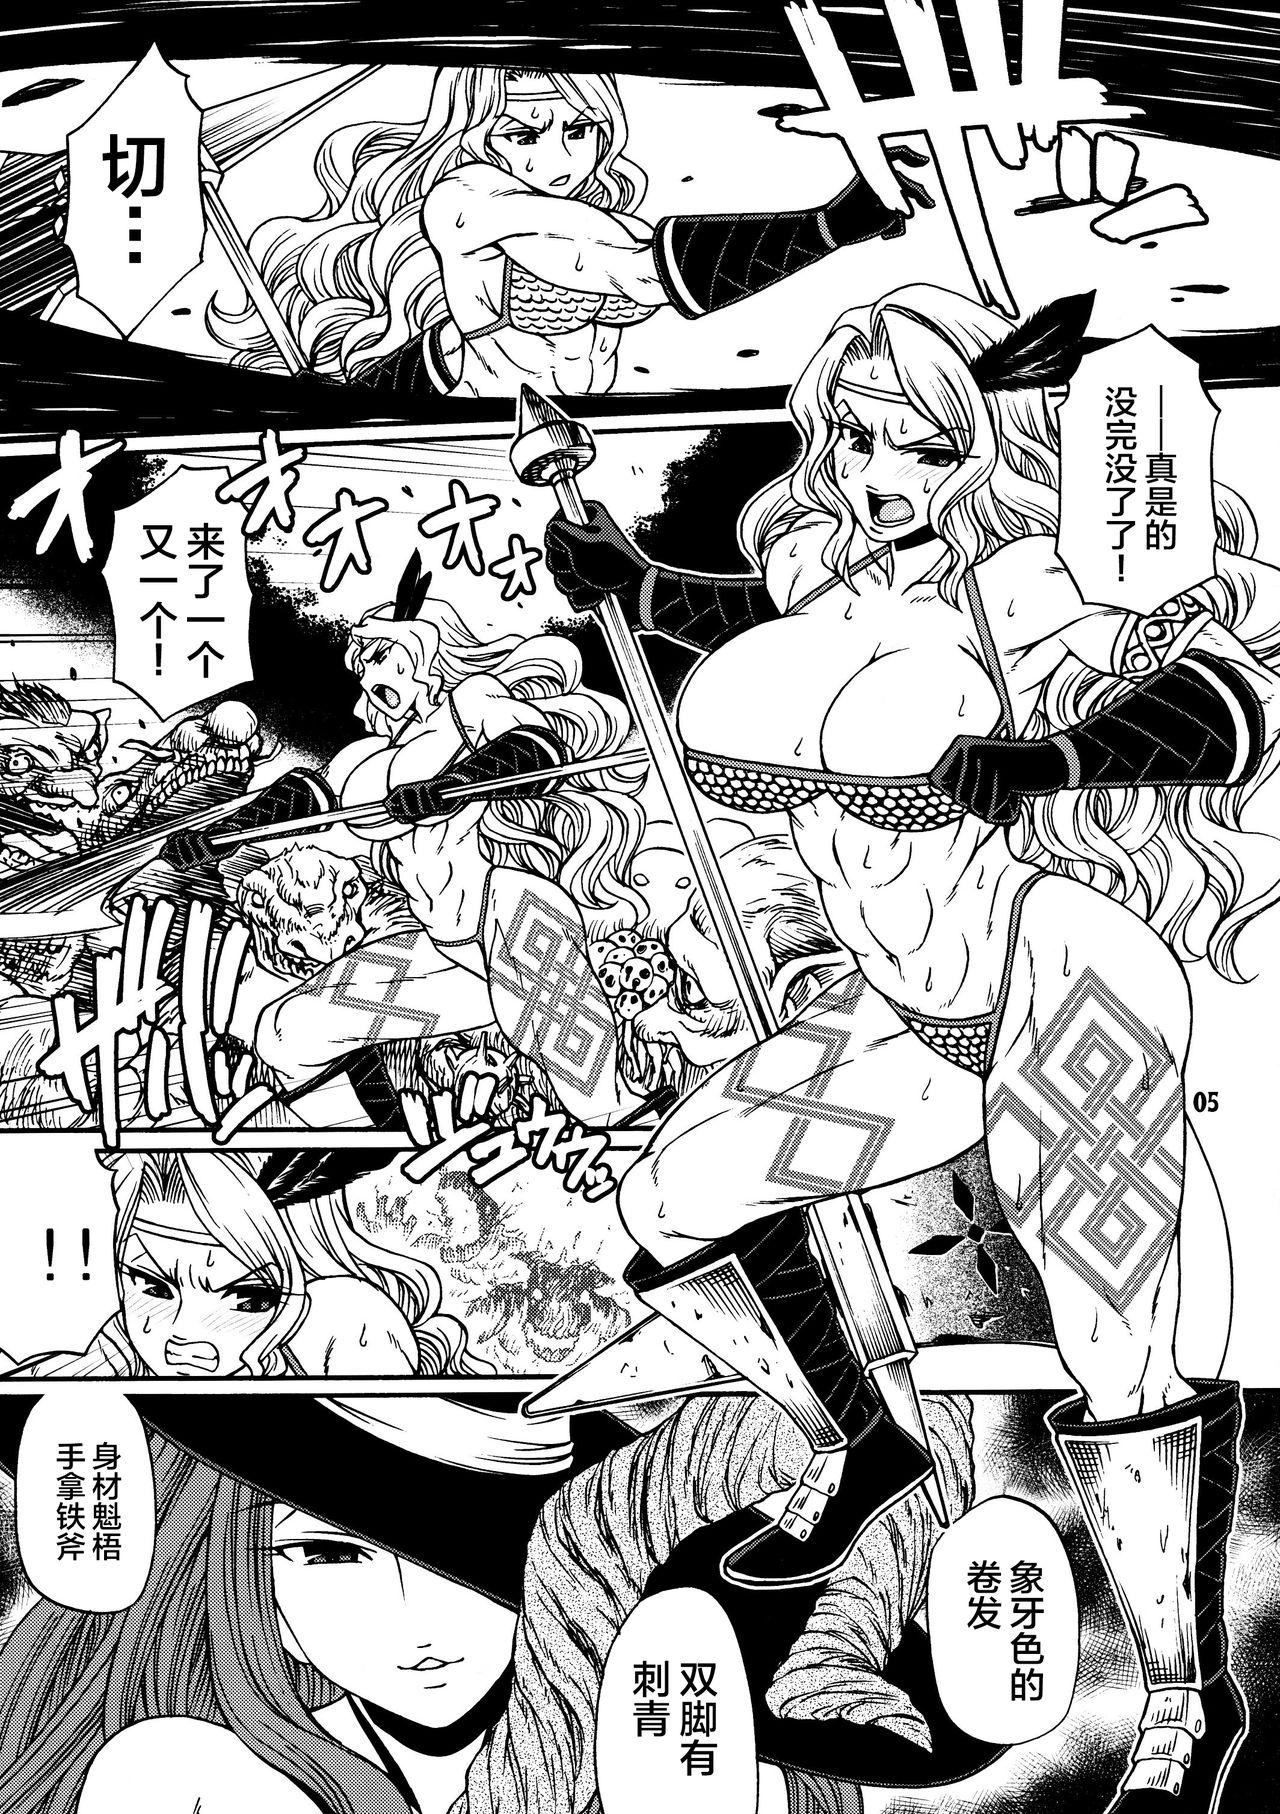 Safada PARTY HARD - Dragons crown Amature Sex - Page 4